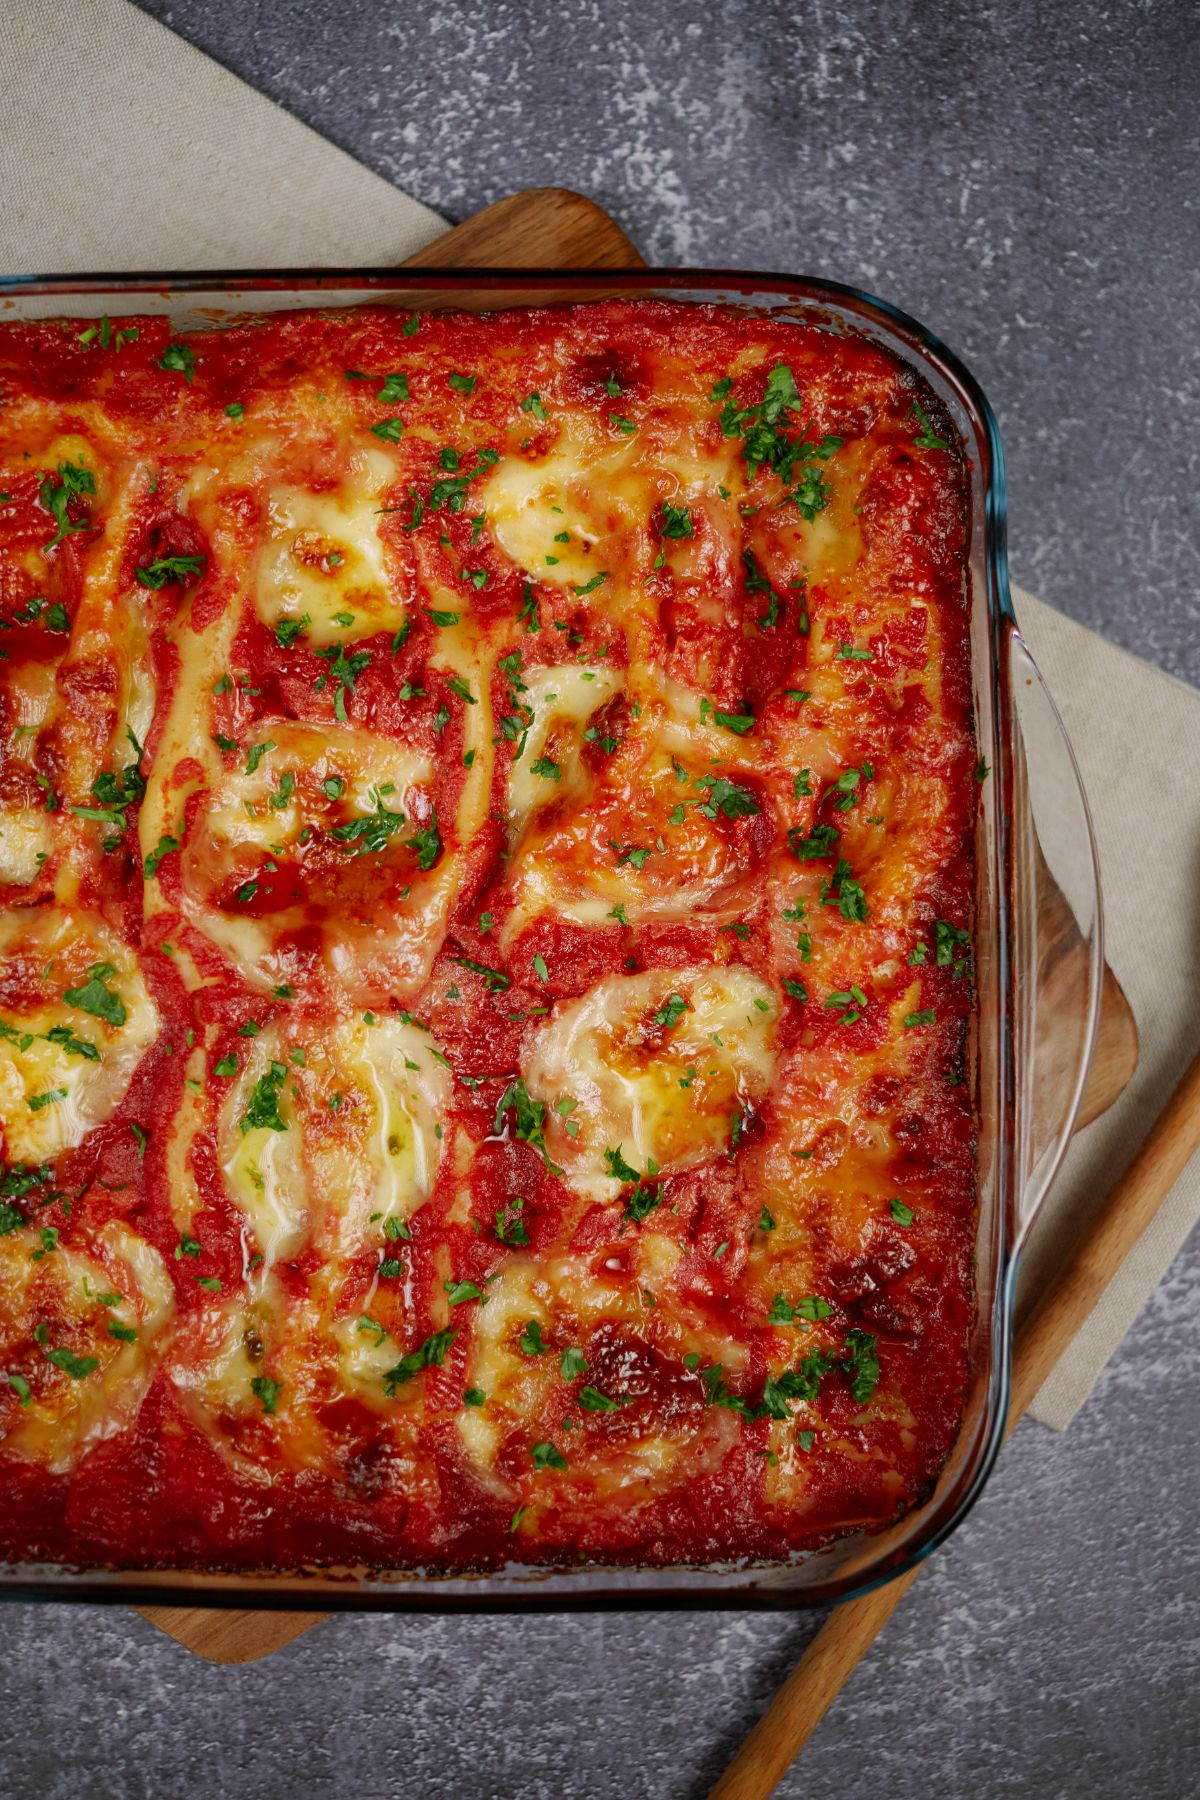 image looking down at baked stuffed pasta in casserole dish